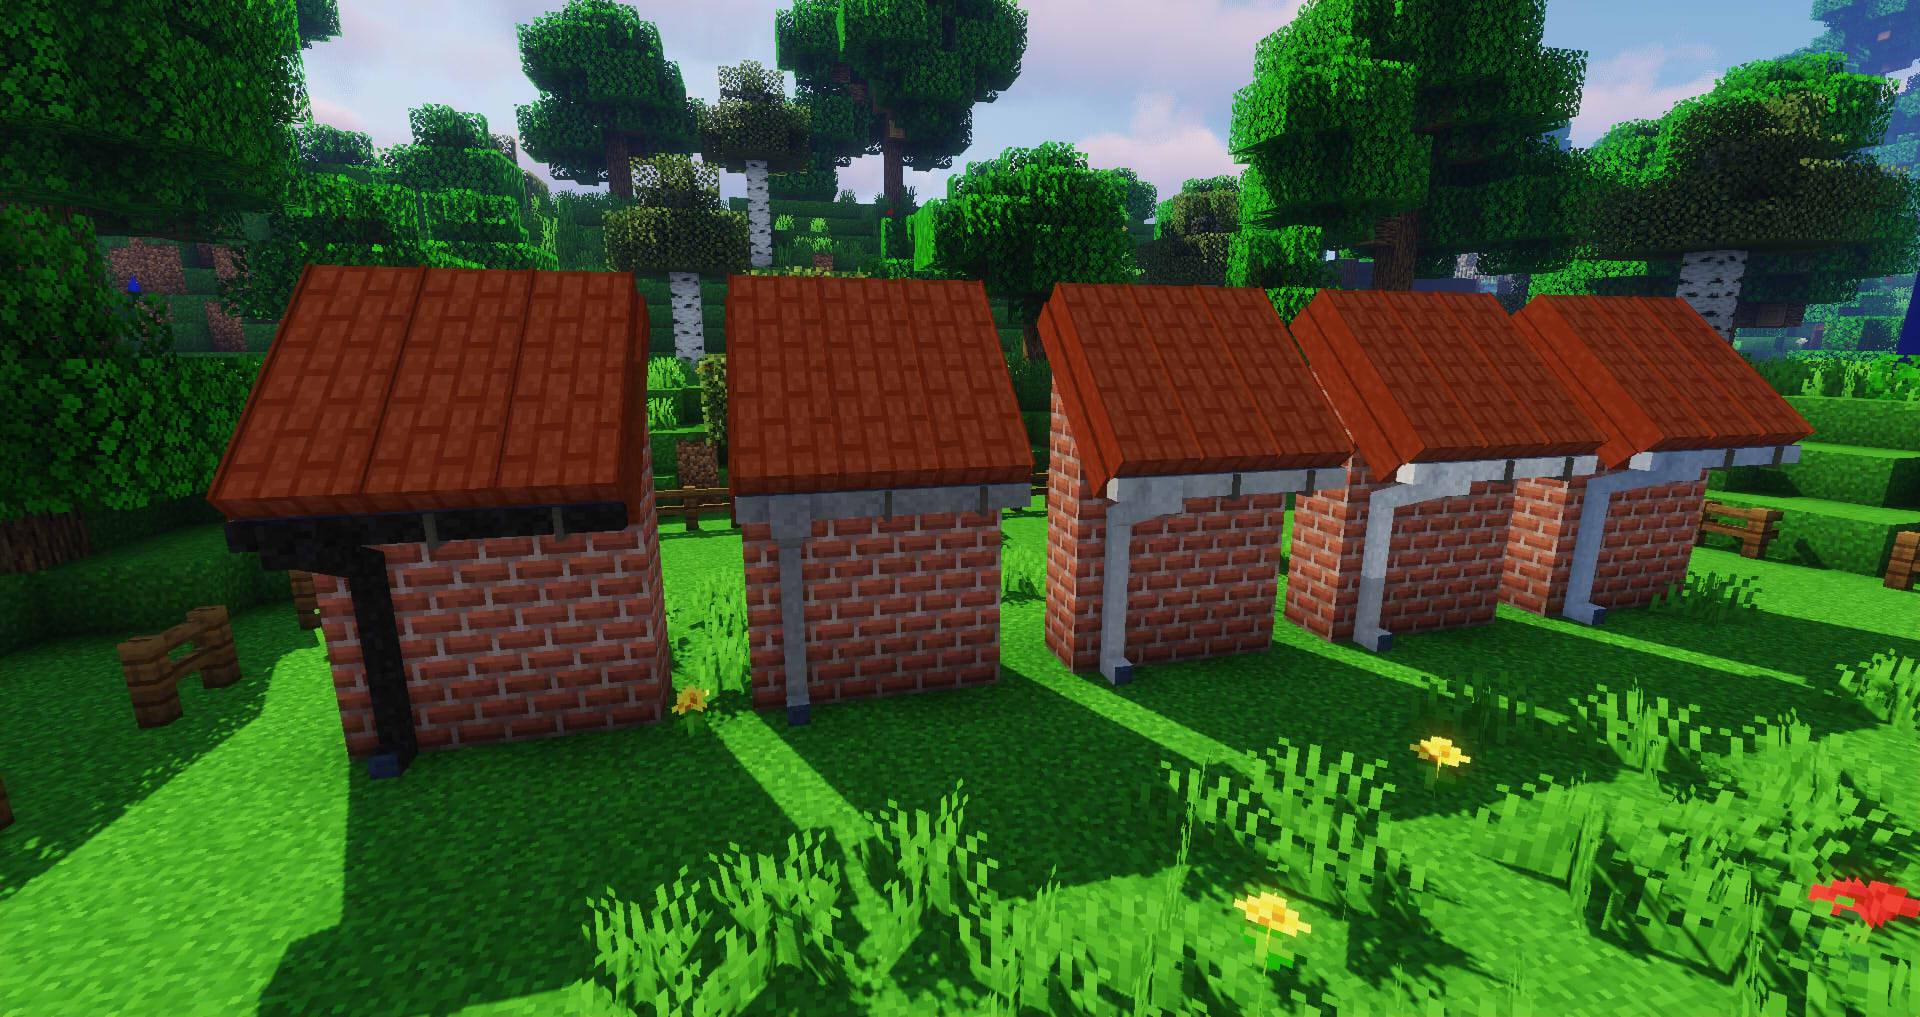 Macaw_s Roofs mod for minecraft 26